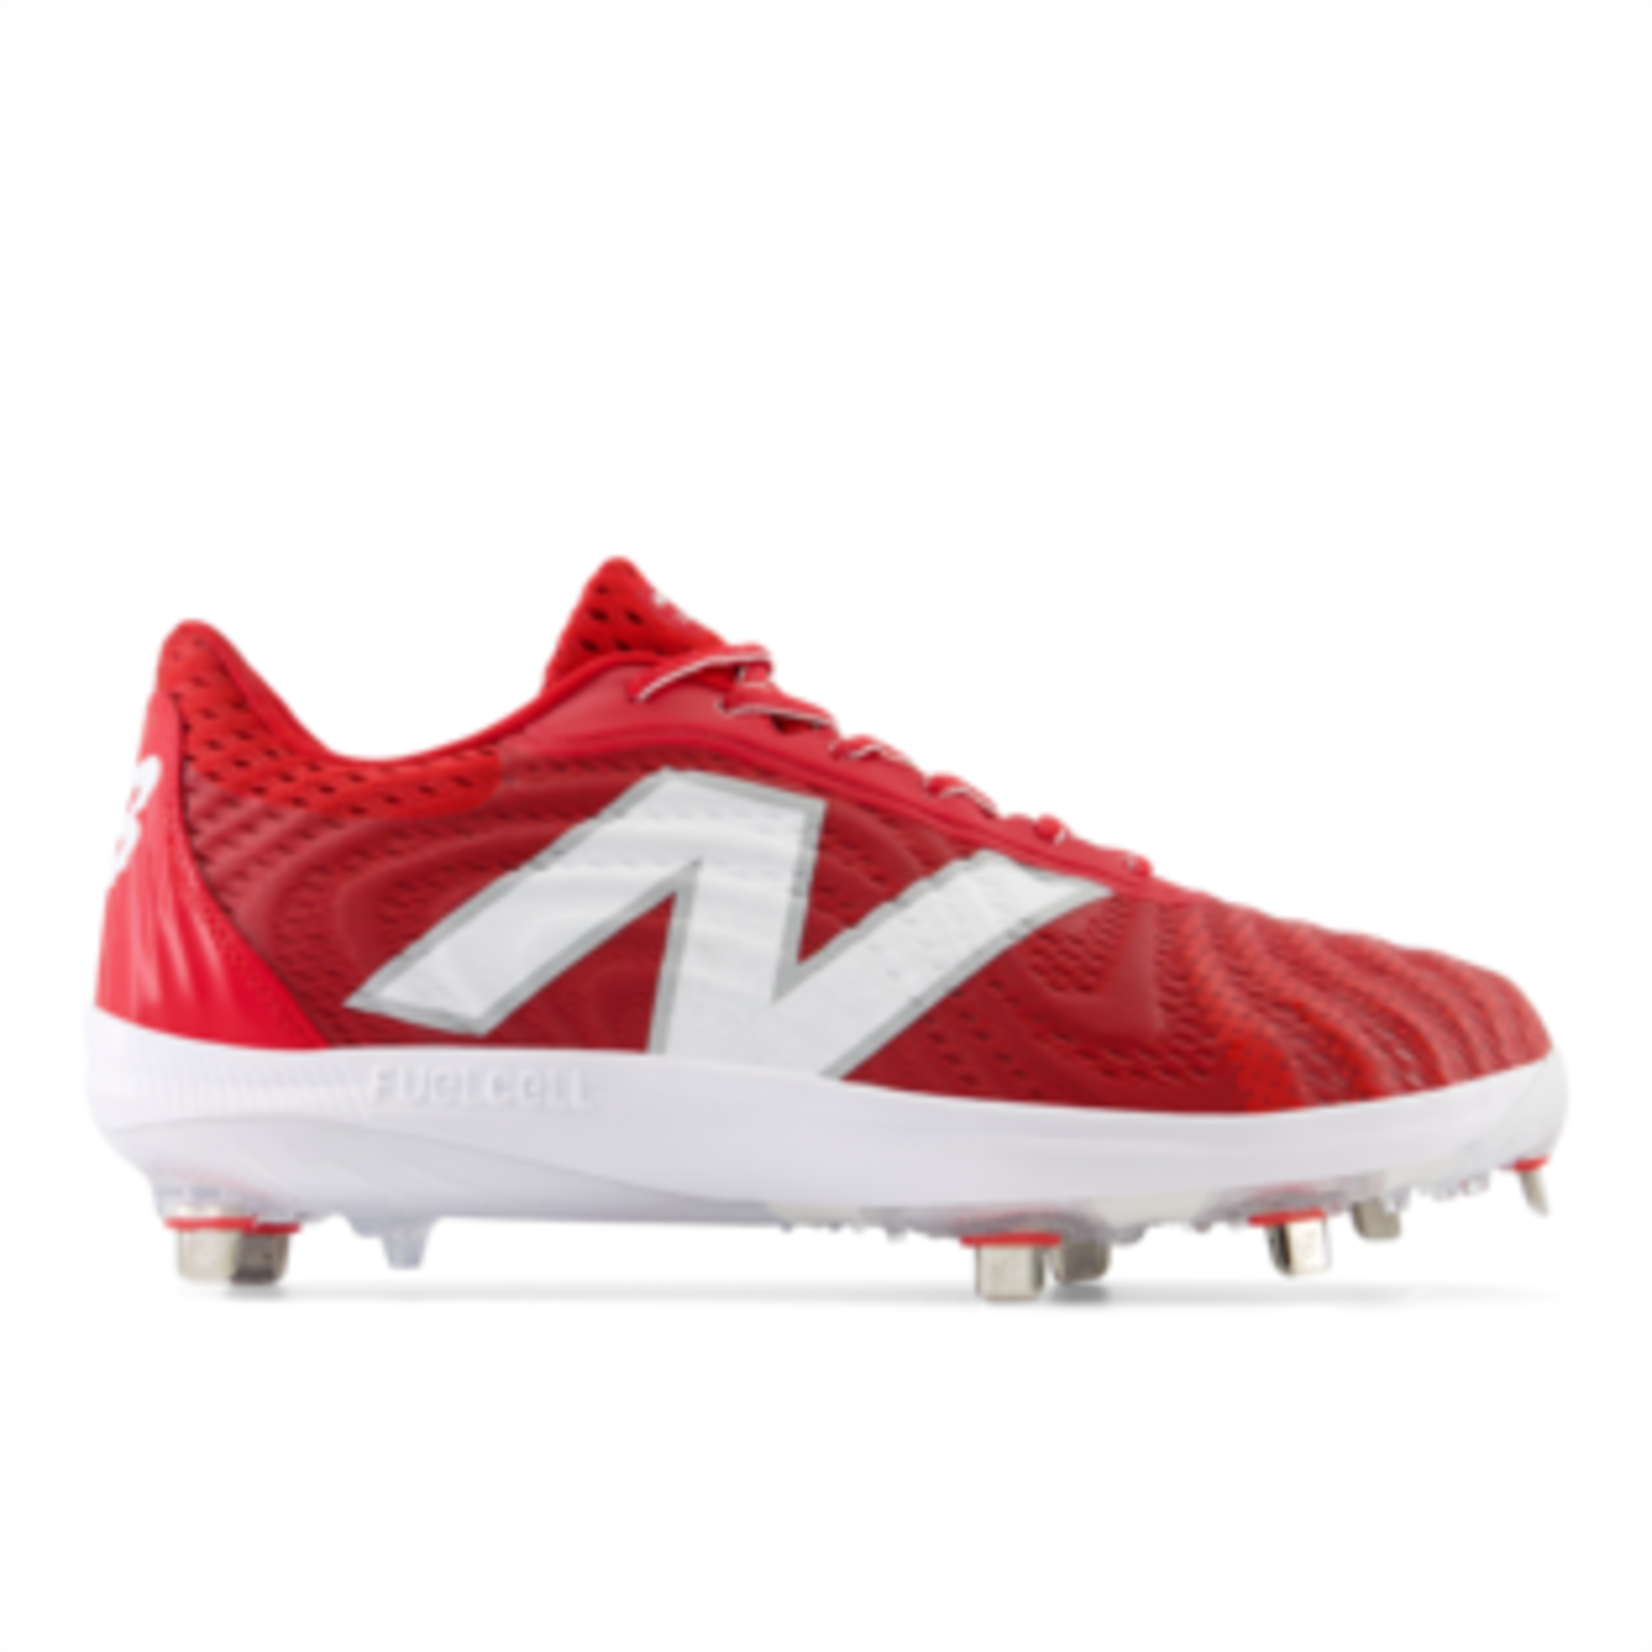 New Balance New Balance Baseball Shoes, FuelCell 4040 v7, Steel Cleat, Mens